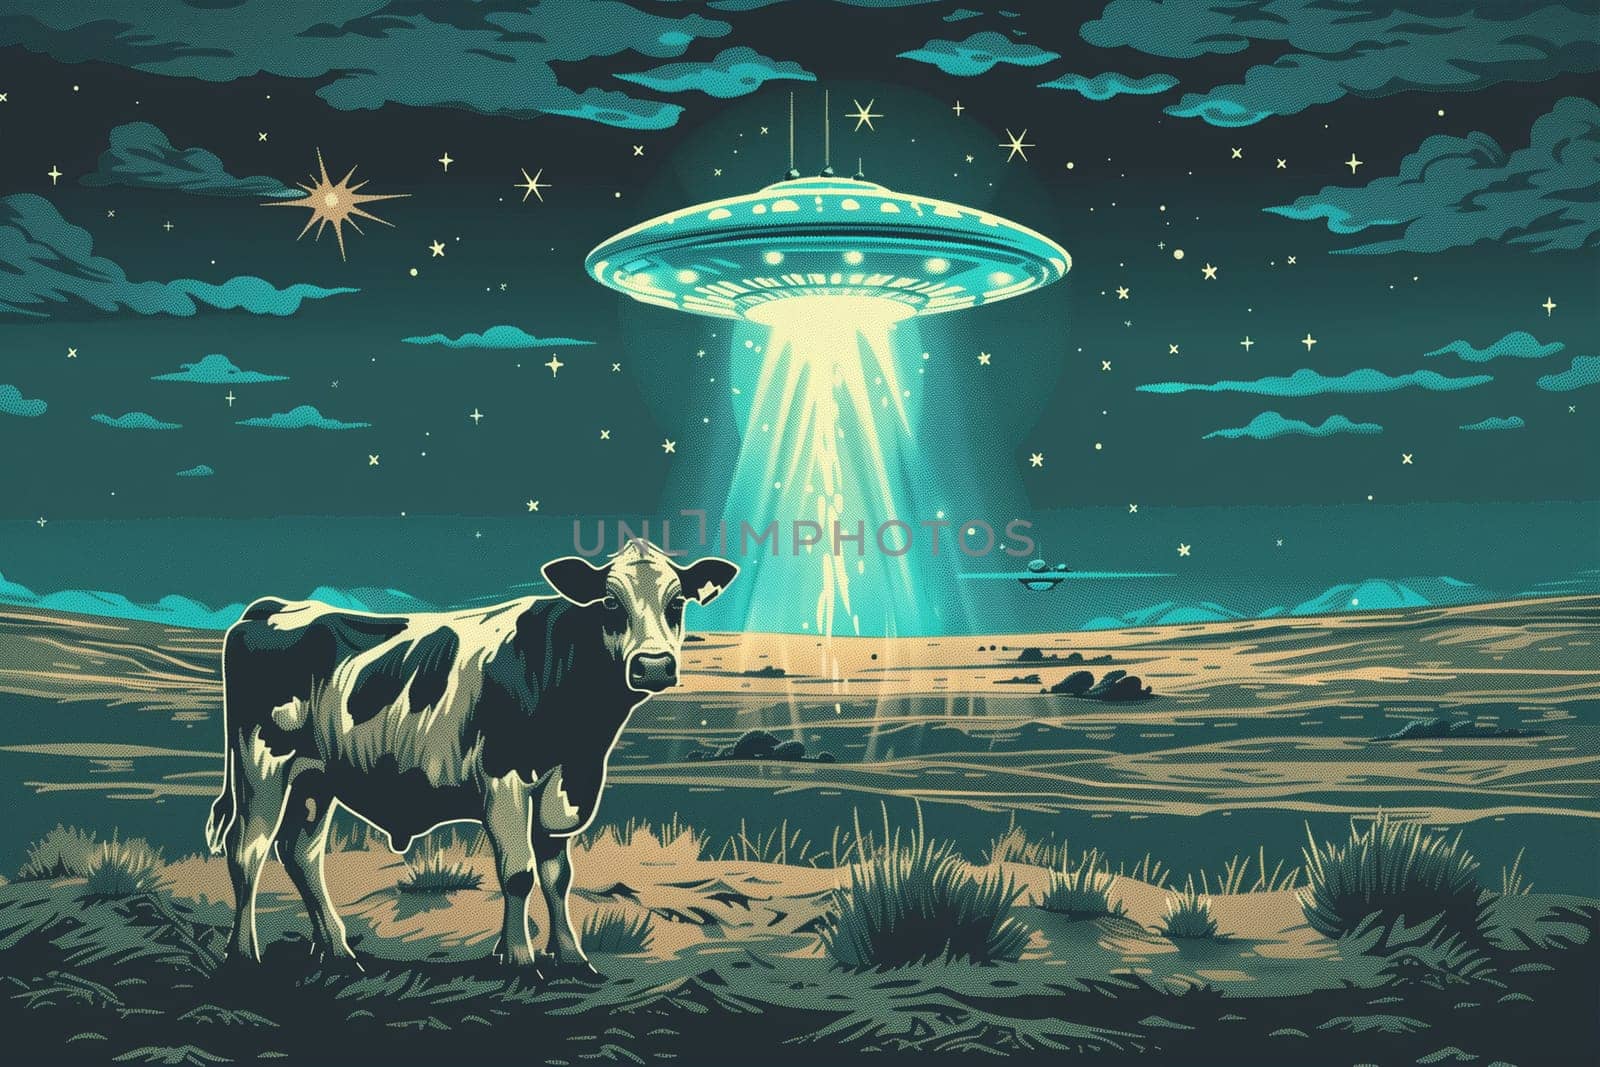 A digital painting of a UFO hovering over a cow in a field at night. The UFO is emitting a beam of light.